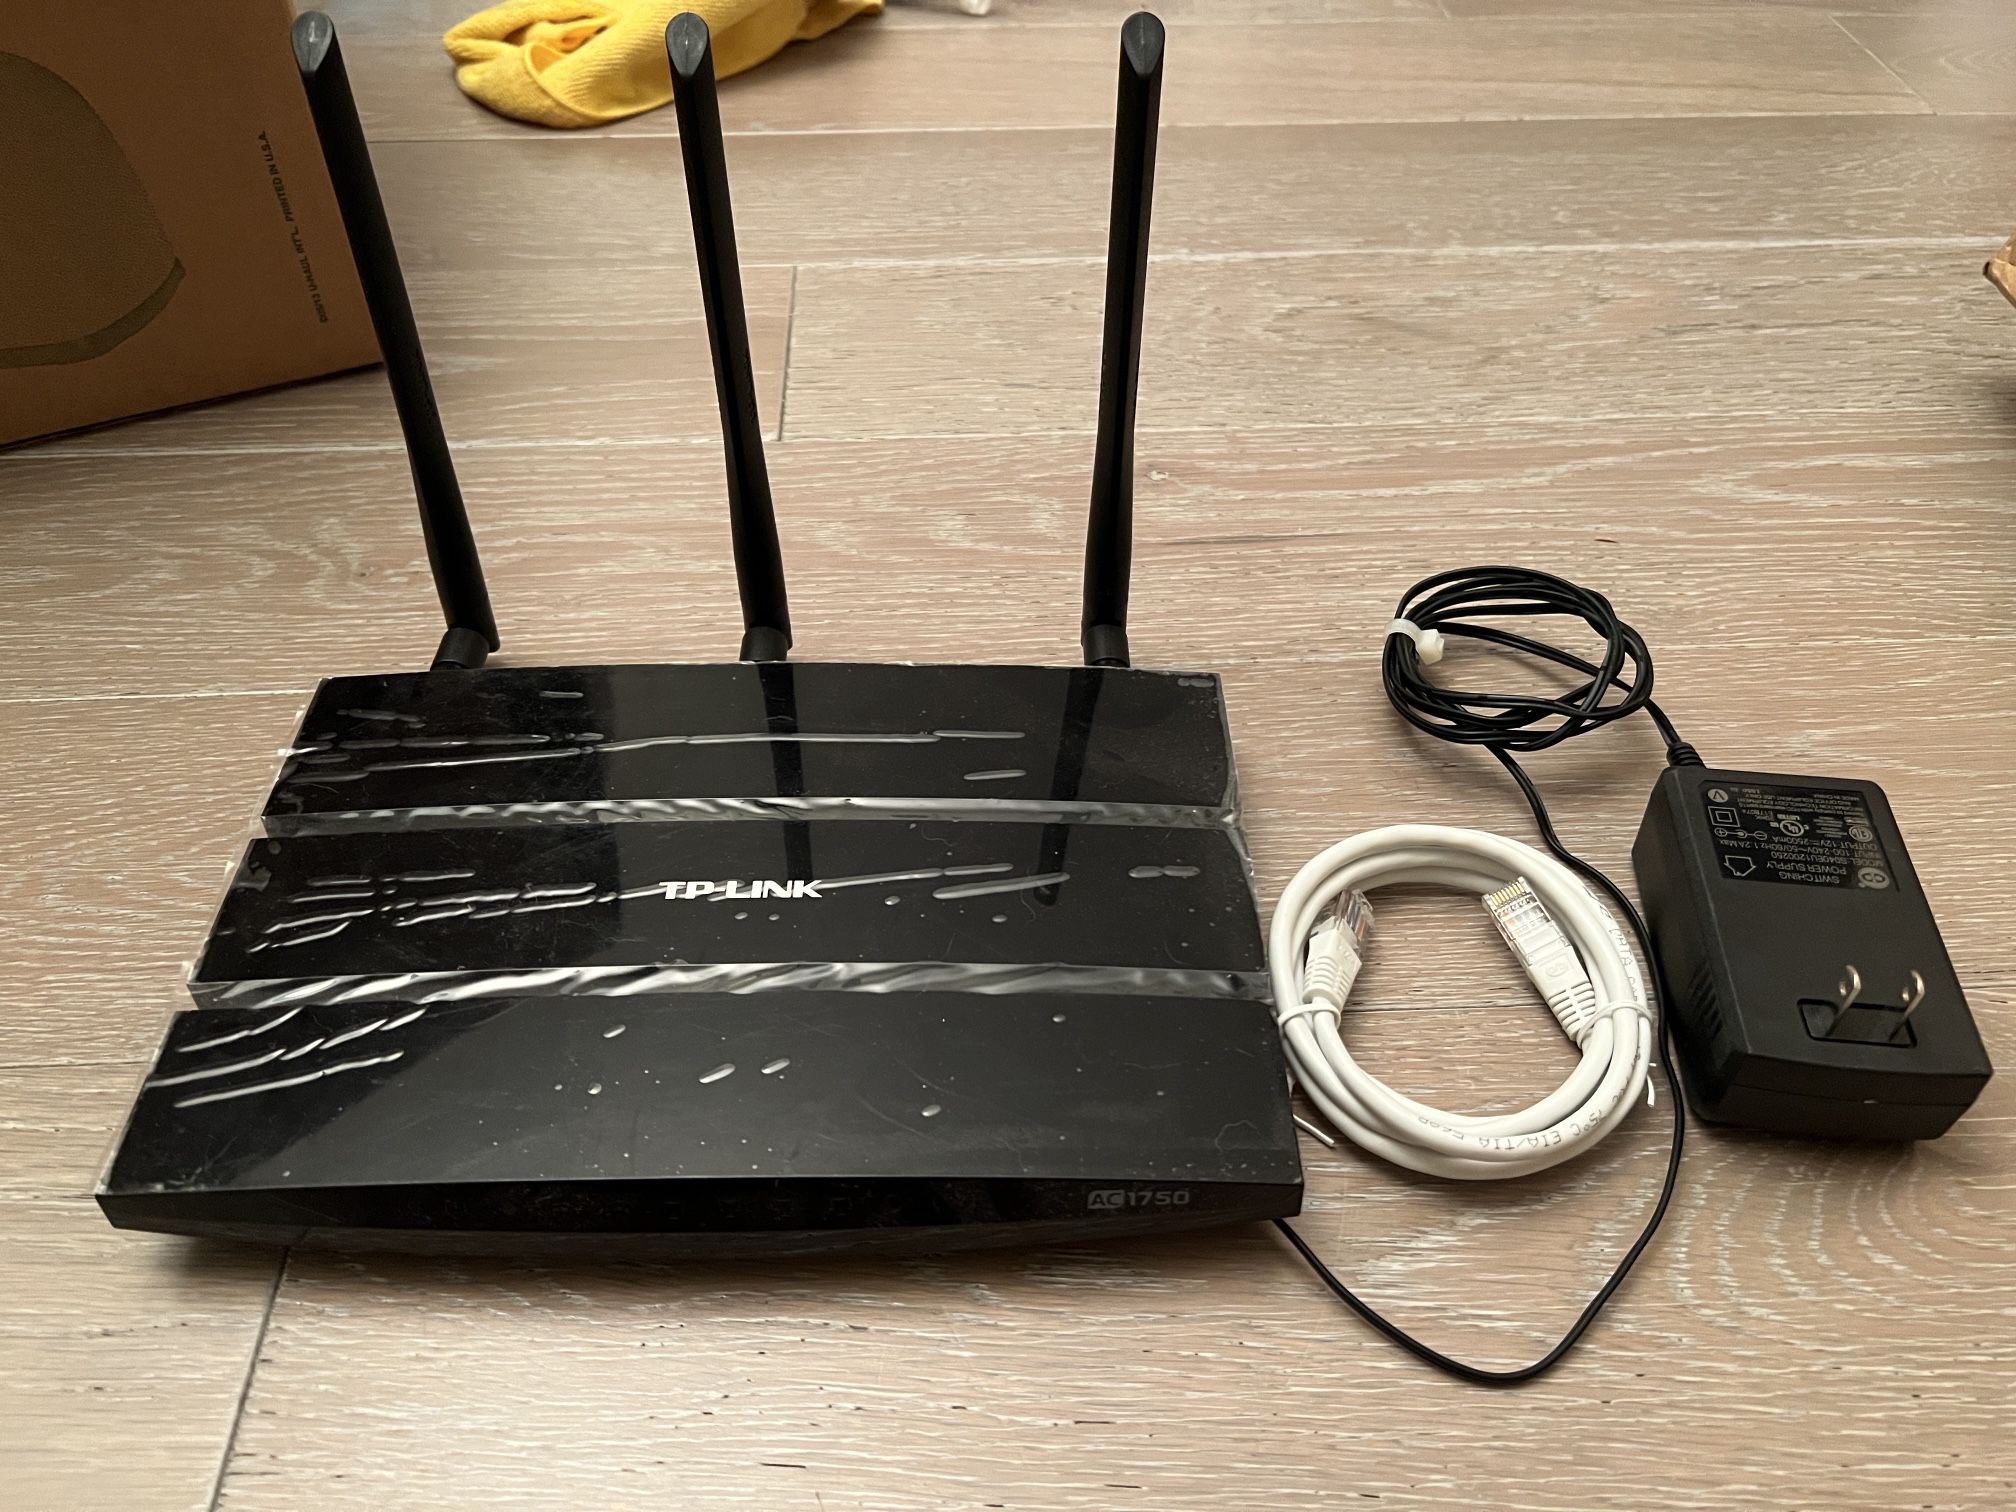 Restraint fry dangerous TP-Link AC1750 Smart WiFi Router (Archer C7) - Dual Band Gigabit Wireless  Internet Router for Sale in New York, NY - OfferUp